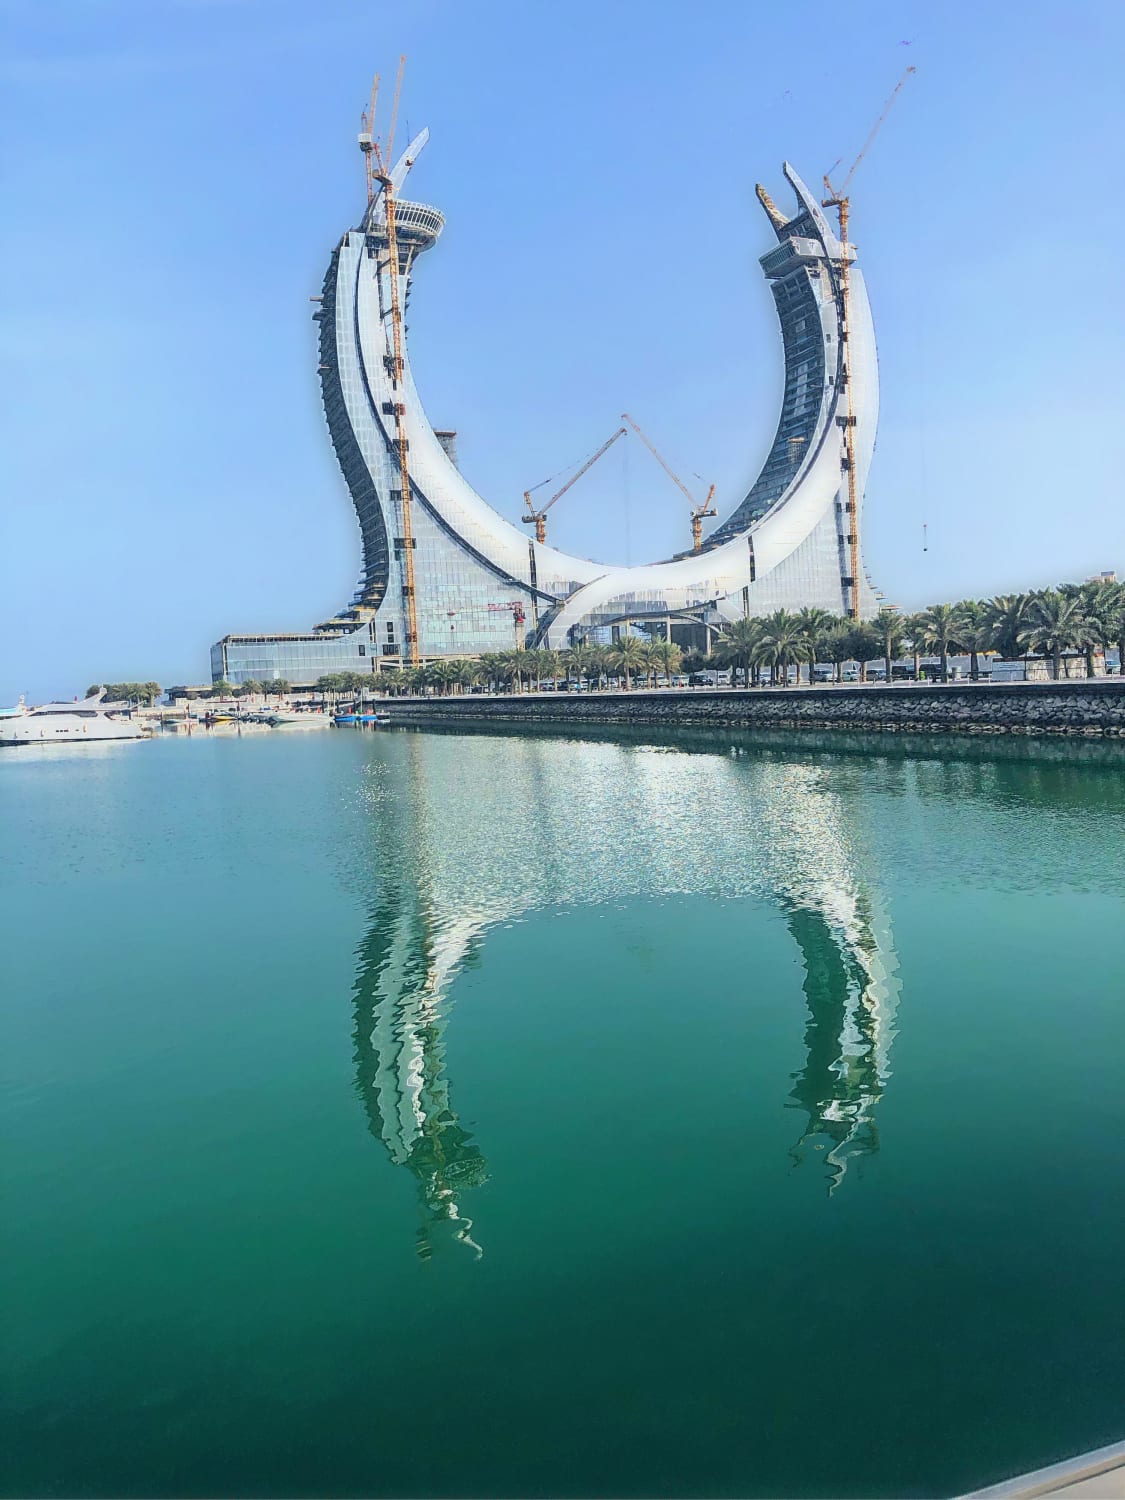 Reflection on the sea of the katara towers, lusail, Qatar( still unfinished)